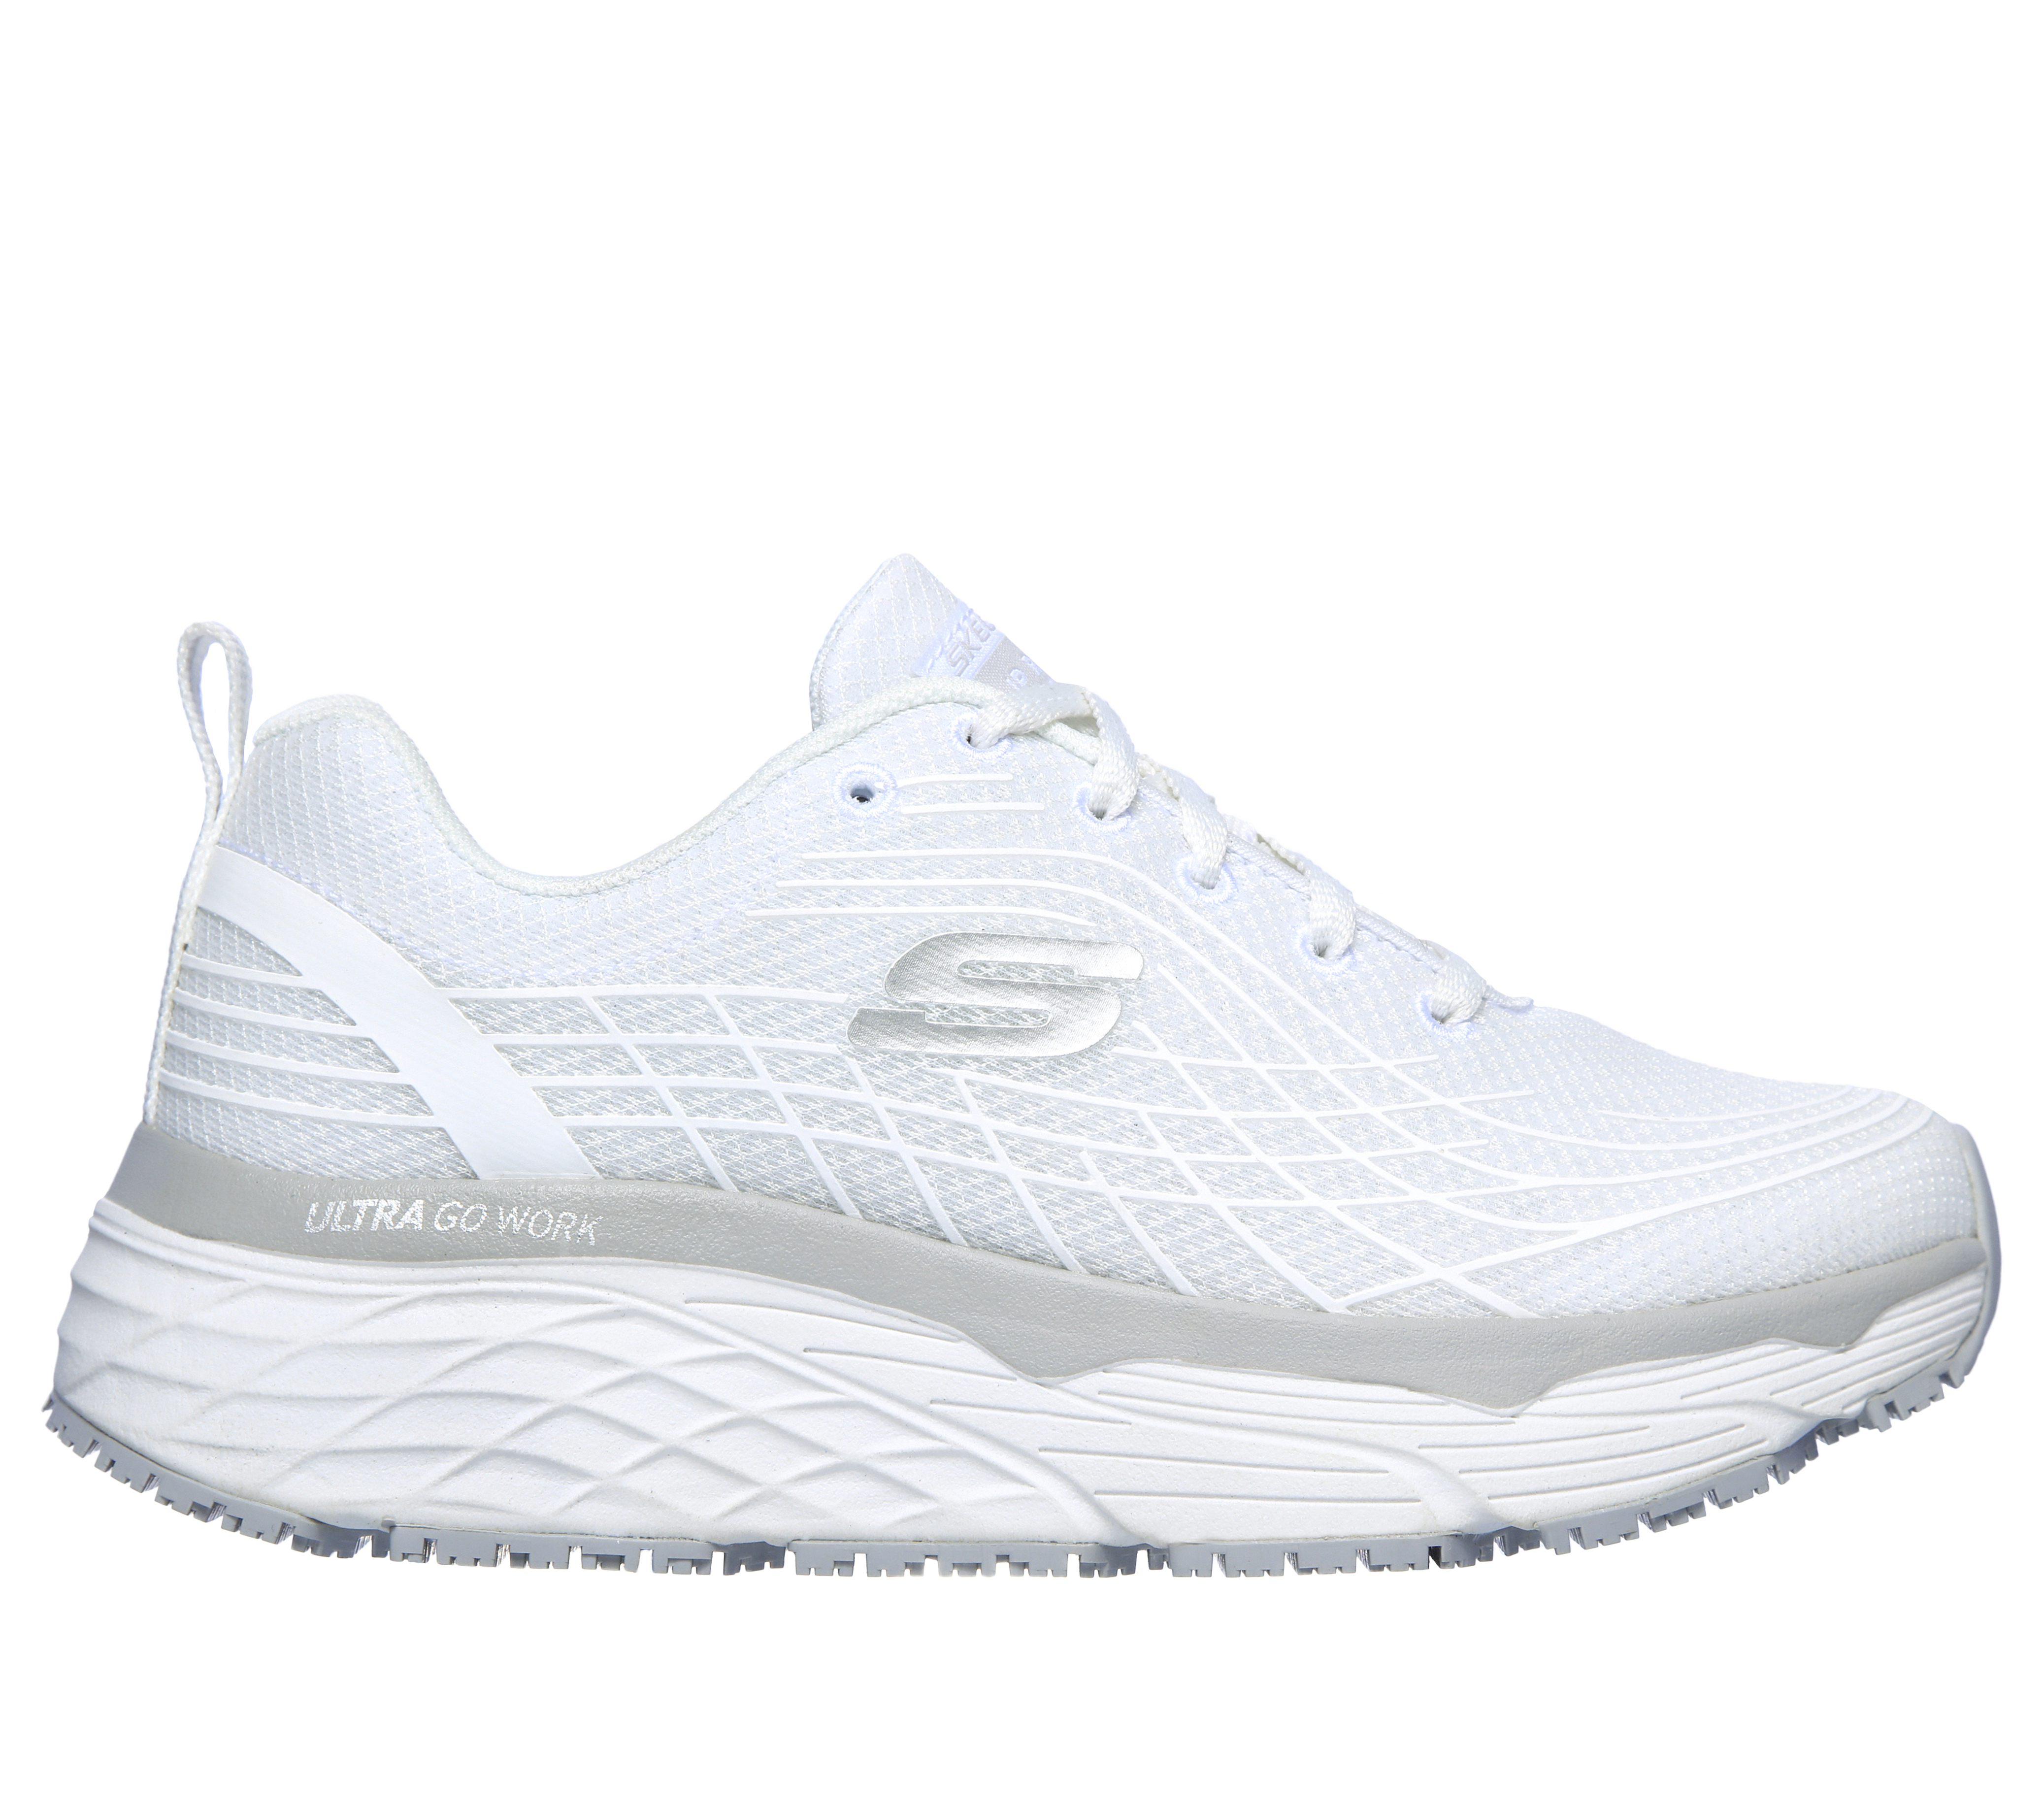 | Work Relaxed Fit: SKECHERS SR Max Elite Cushioning